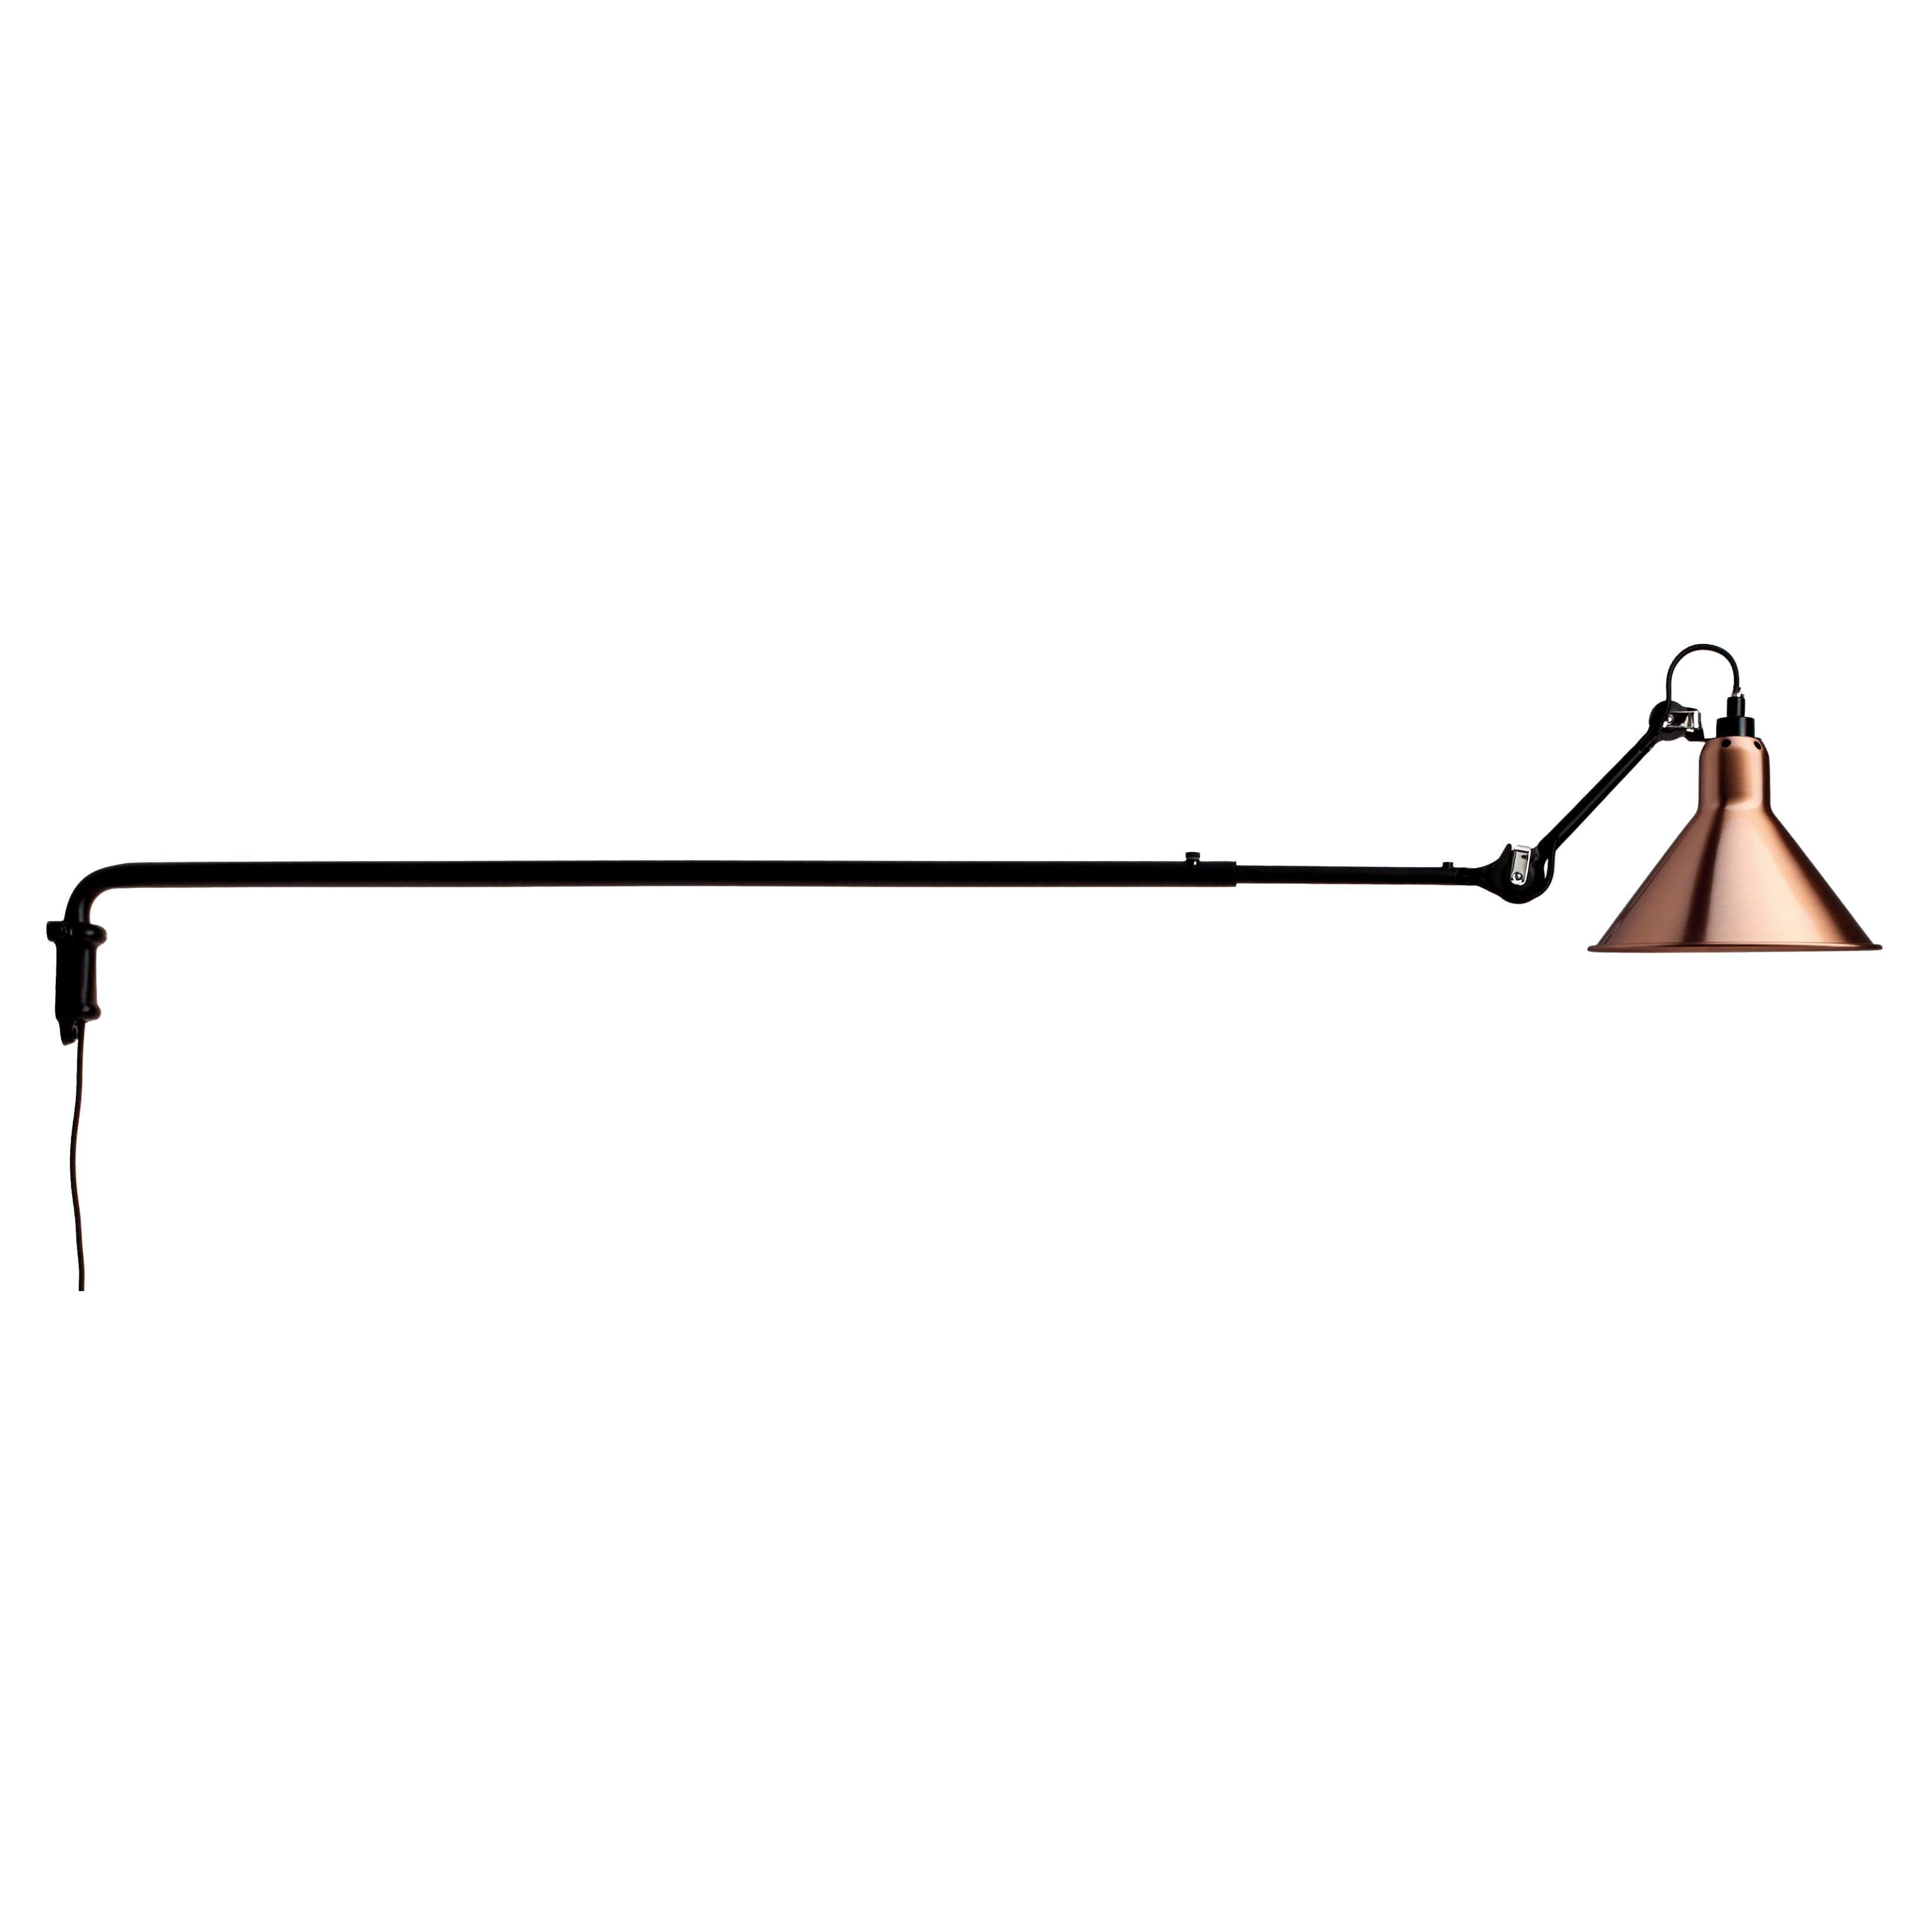 DCW Editions La Lampe Gras N°213 Wall Lamp in Black Arm and Copper Shade